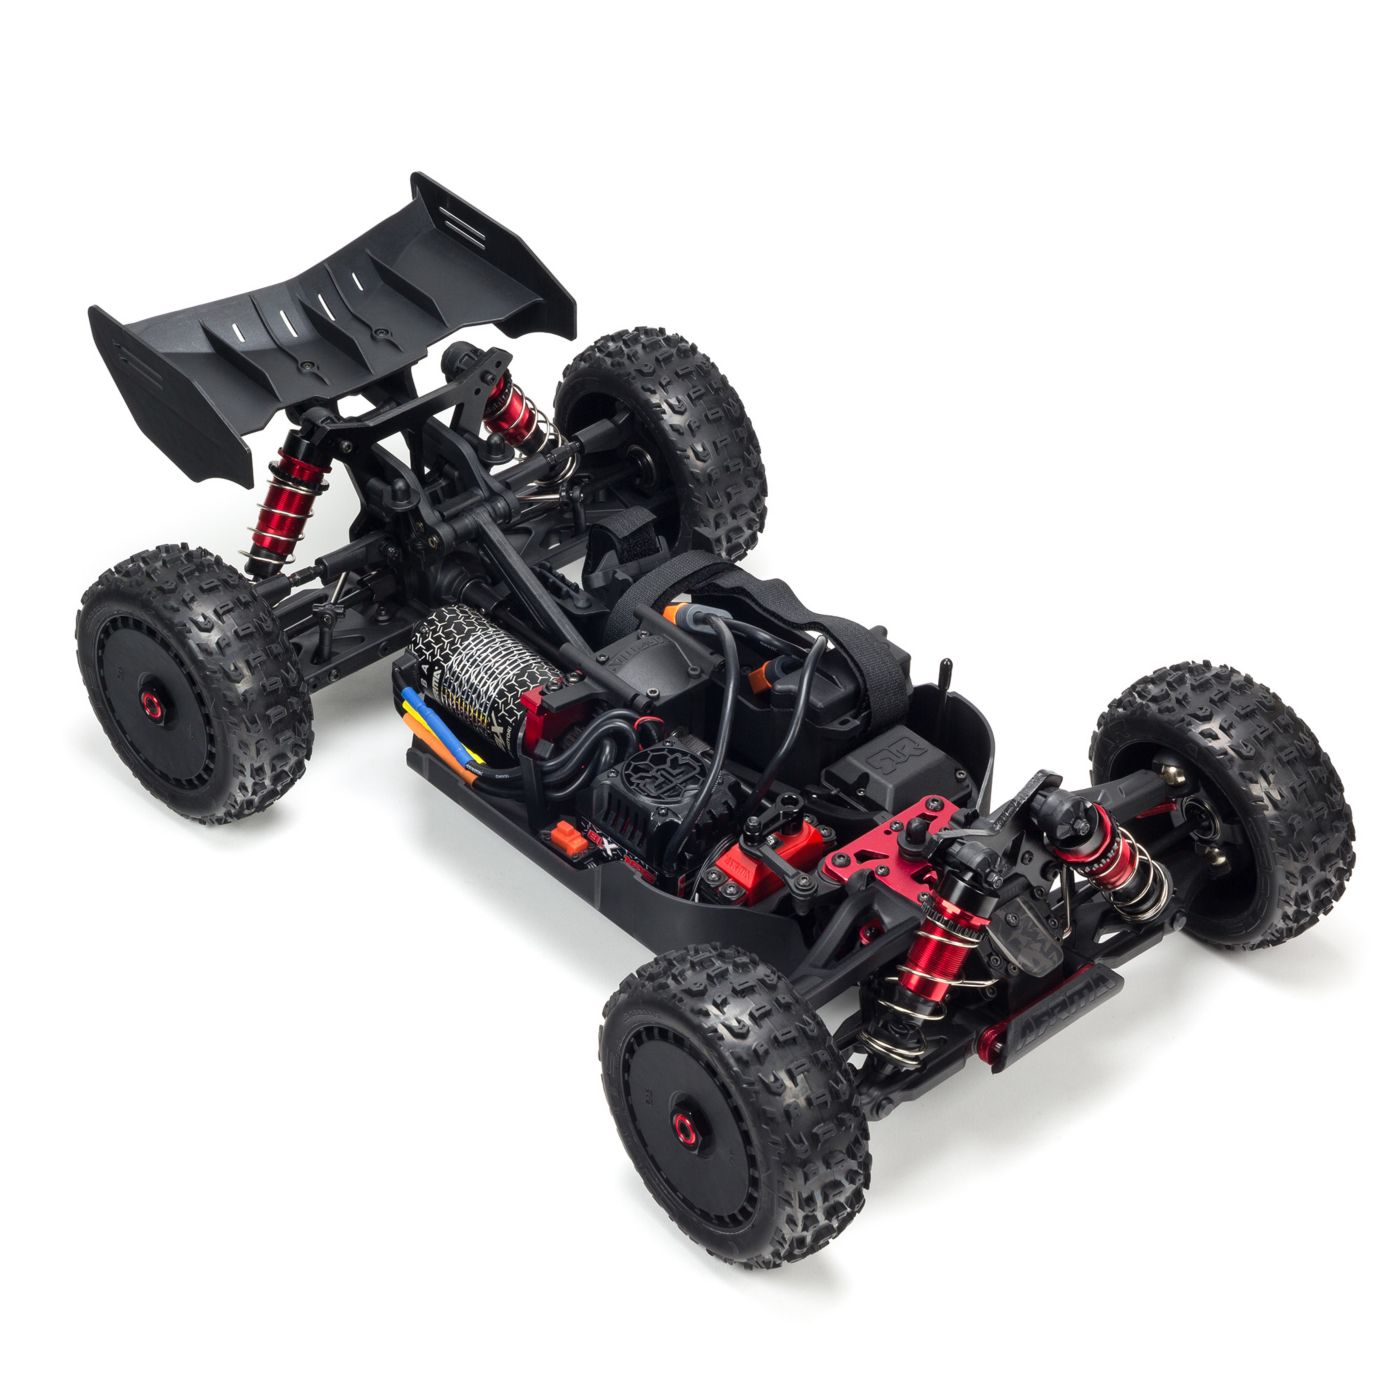 Arrma Typhon 6s BLX 4wd Buggy rtr 03